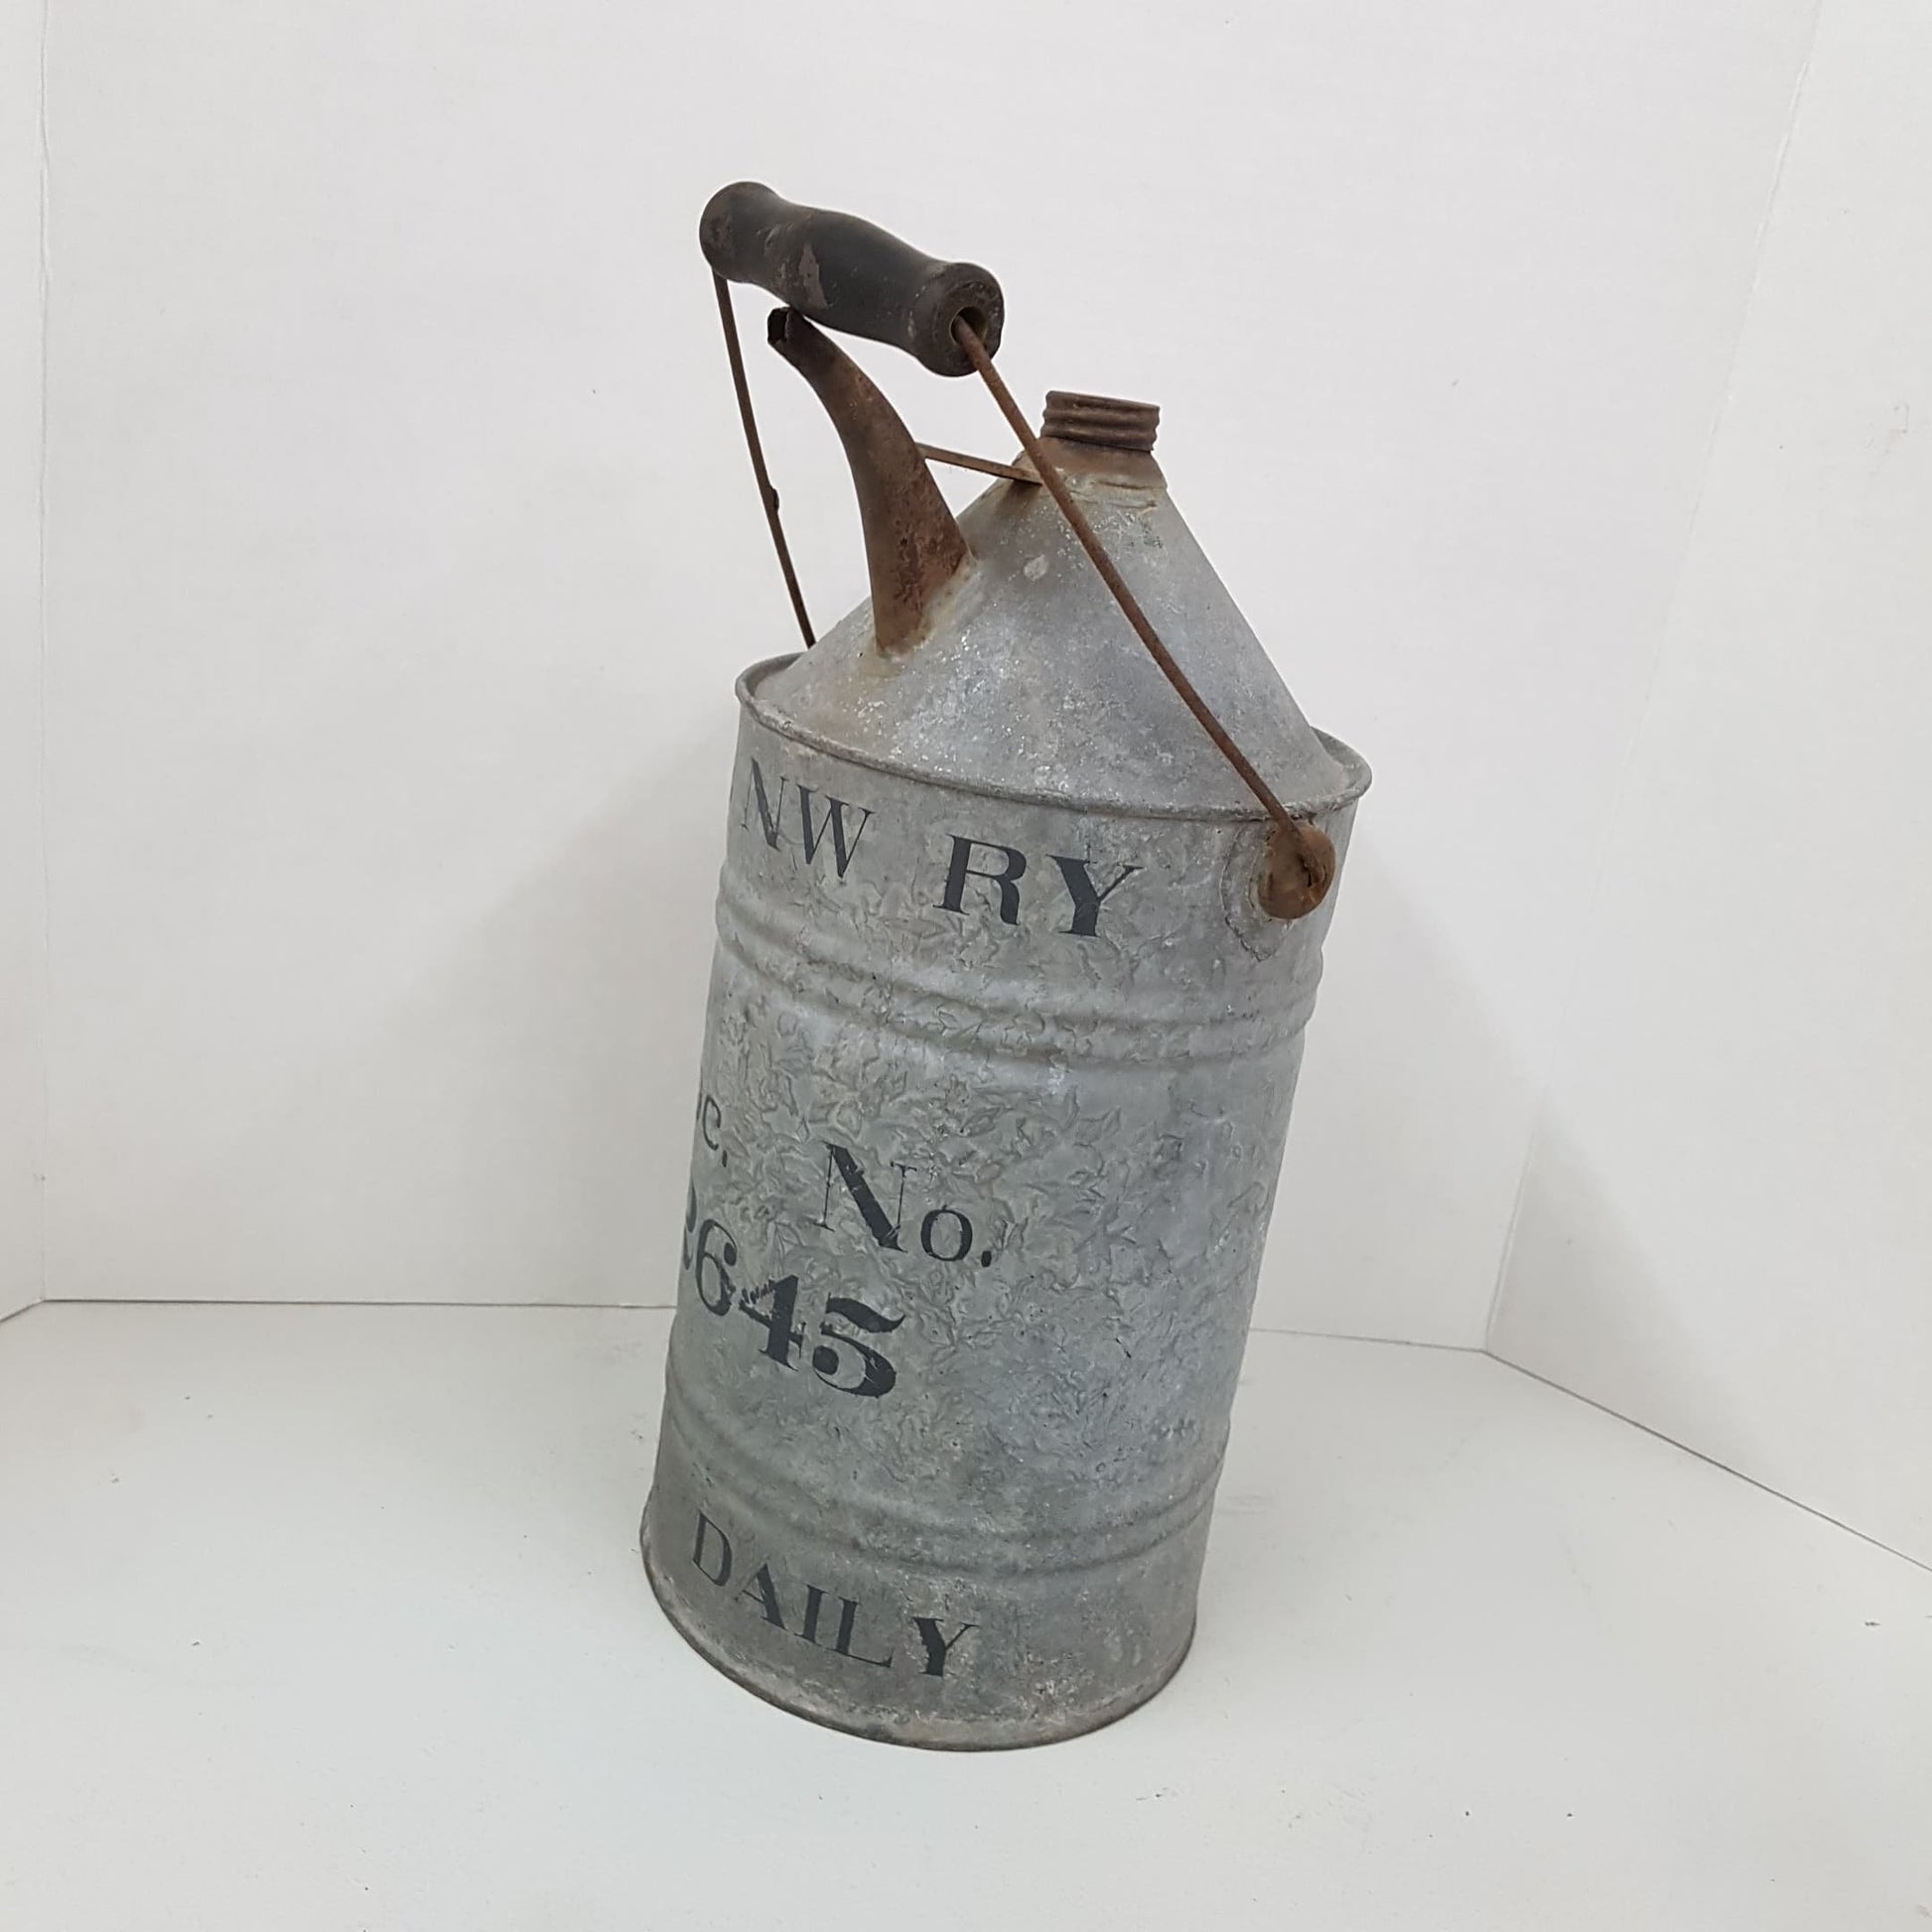 chicago & north western railway oil can